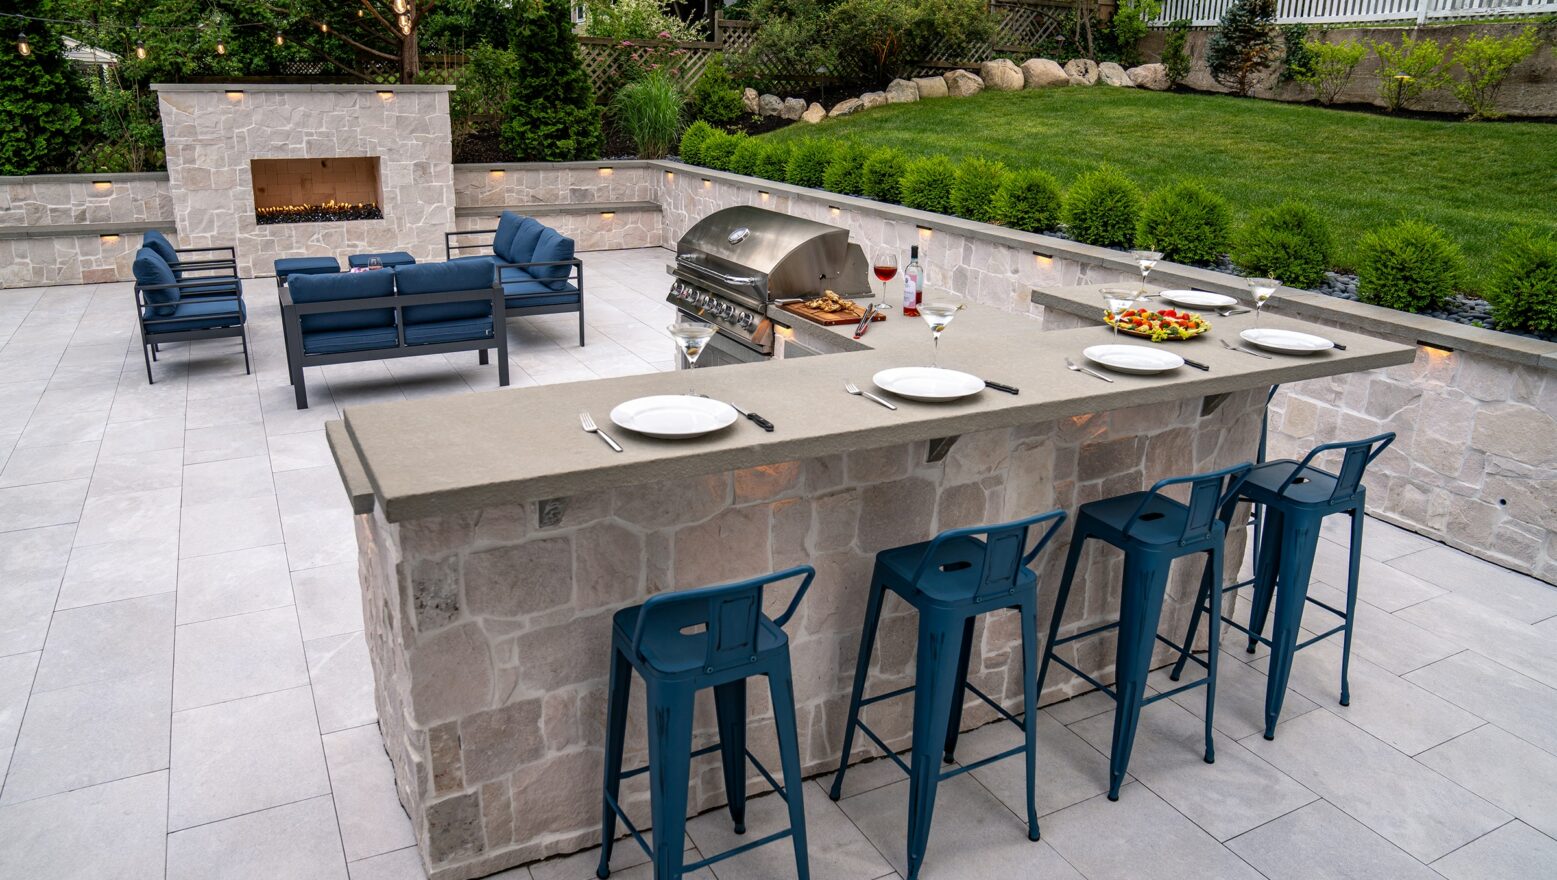 Outdoor kitchen with barstools overlooking patio furniture and an outdoor gas fireplace in Needham, MA.